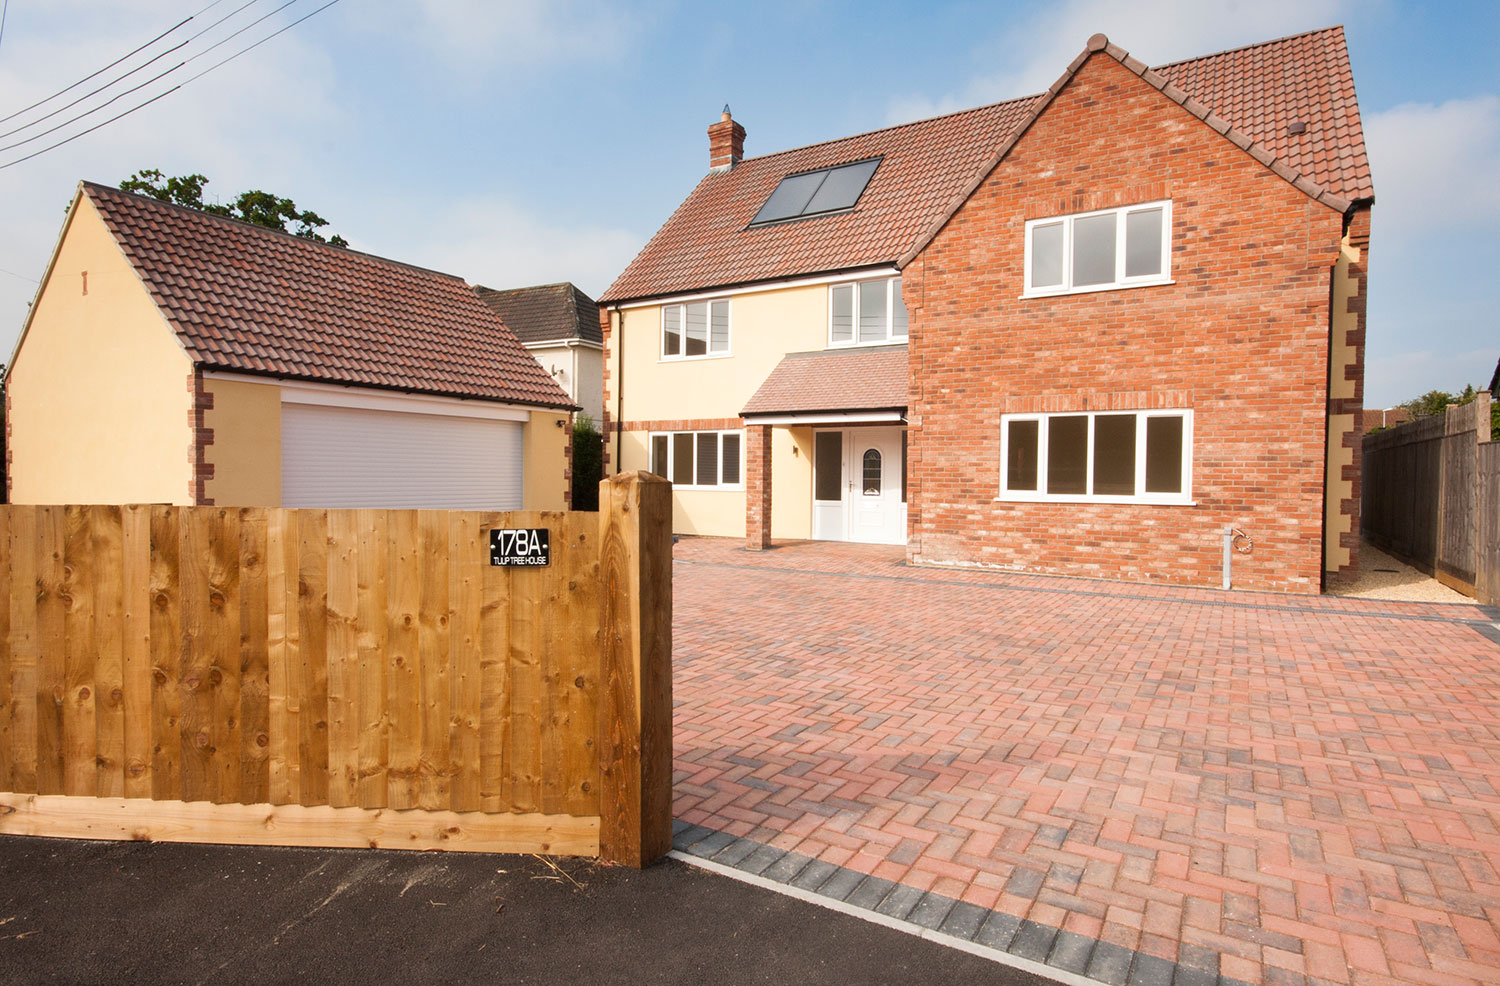 Beautiful new build with double garage, built by F Stillwell & Sons